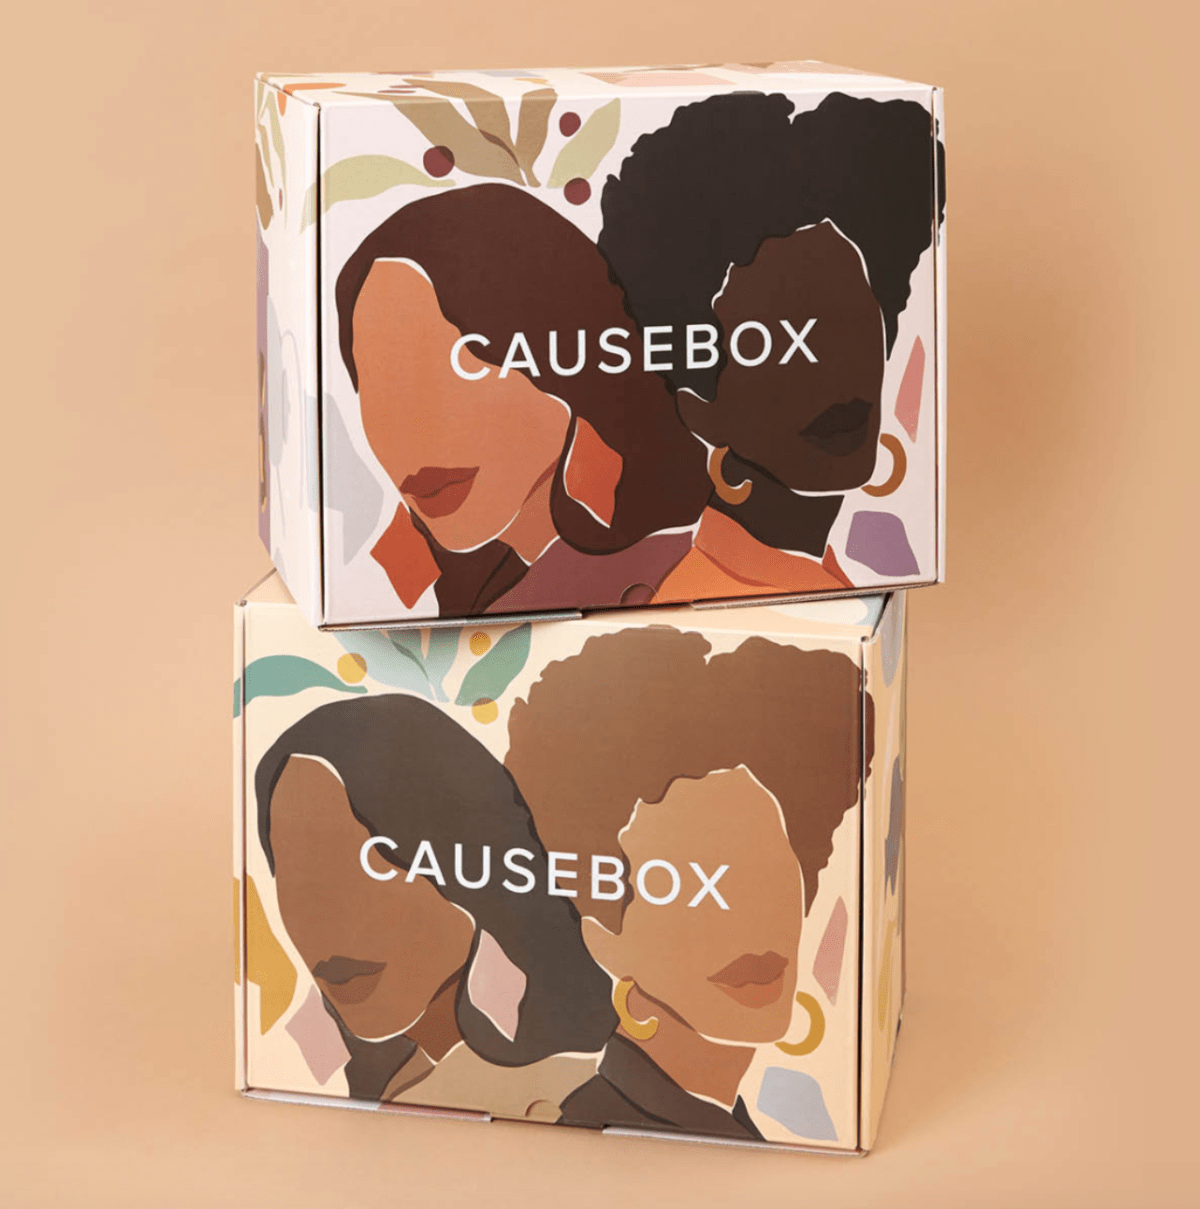 Read more about the article CAUSEBOX Black Friday Sale – Get Your First Box for $29.95 or First Box FREE with Annual Subscription.